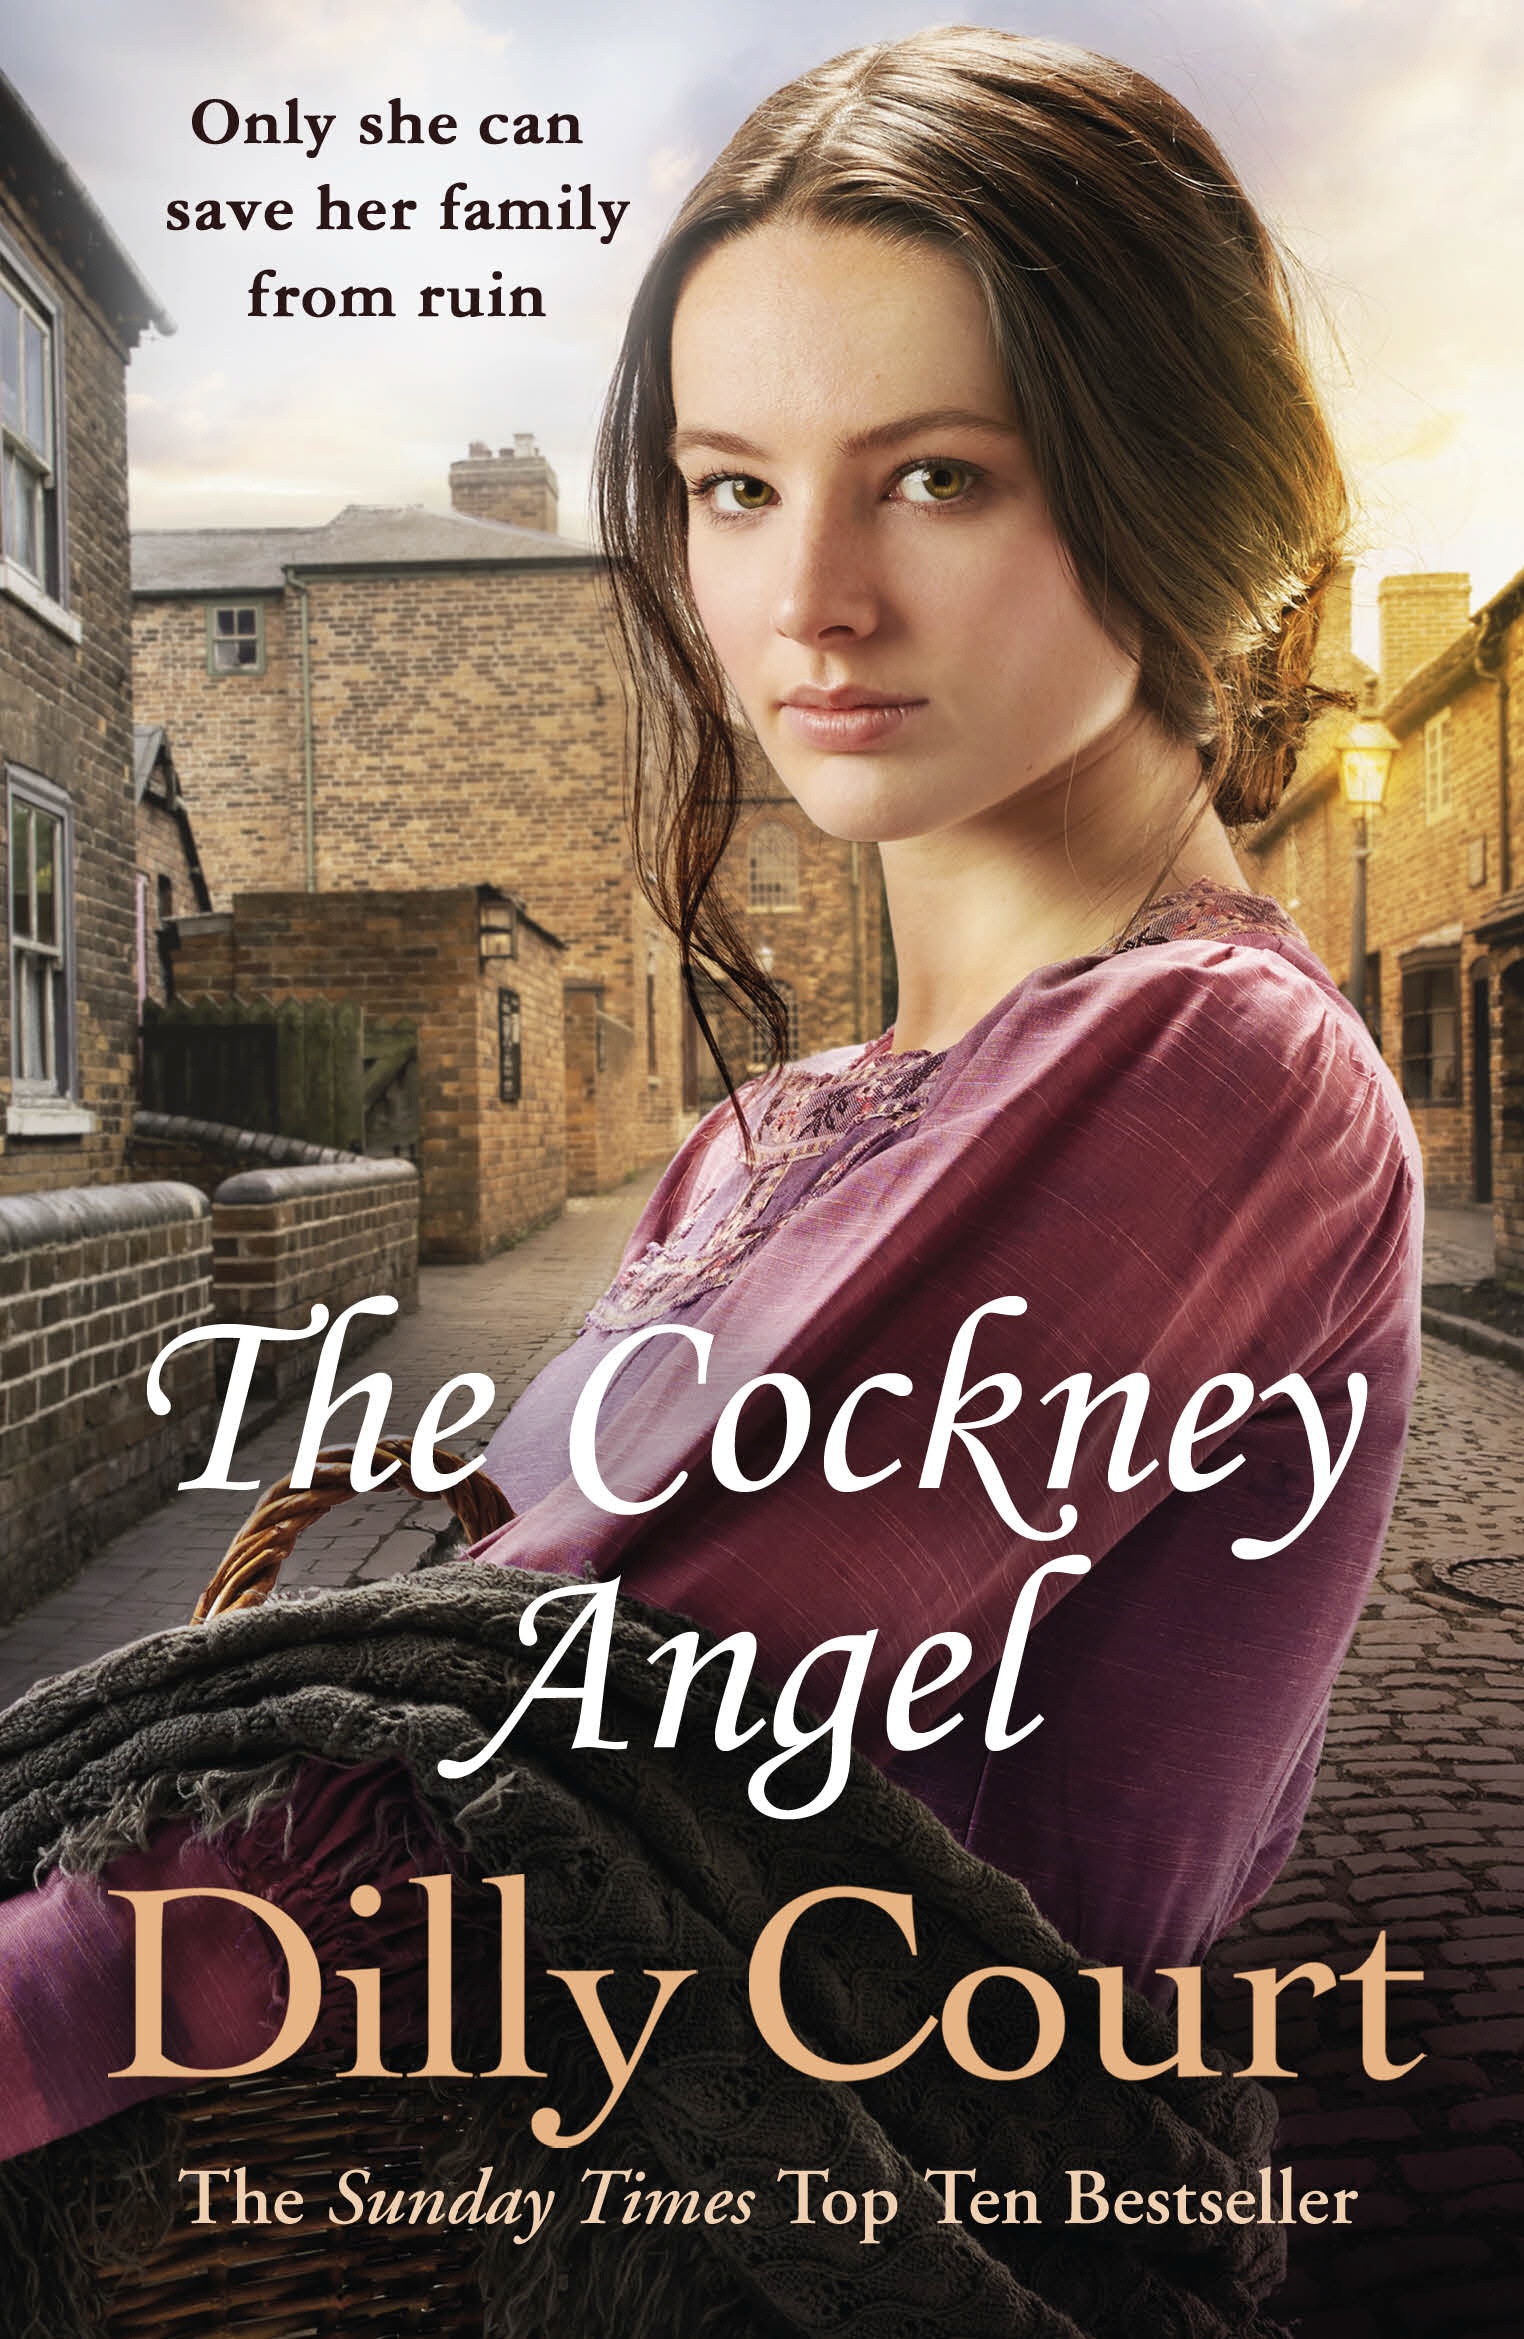 Book “The Cockney Angel” by Dilly Court — September 3, 2020